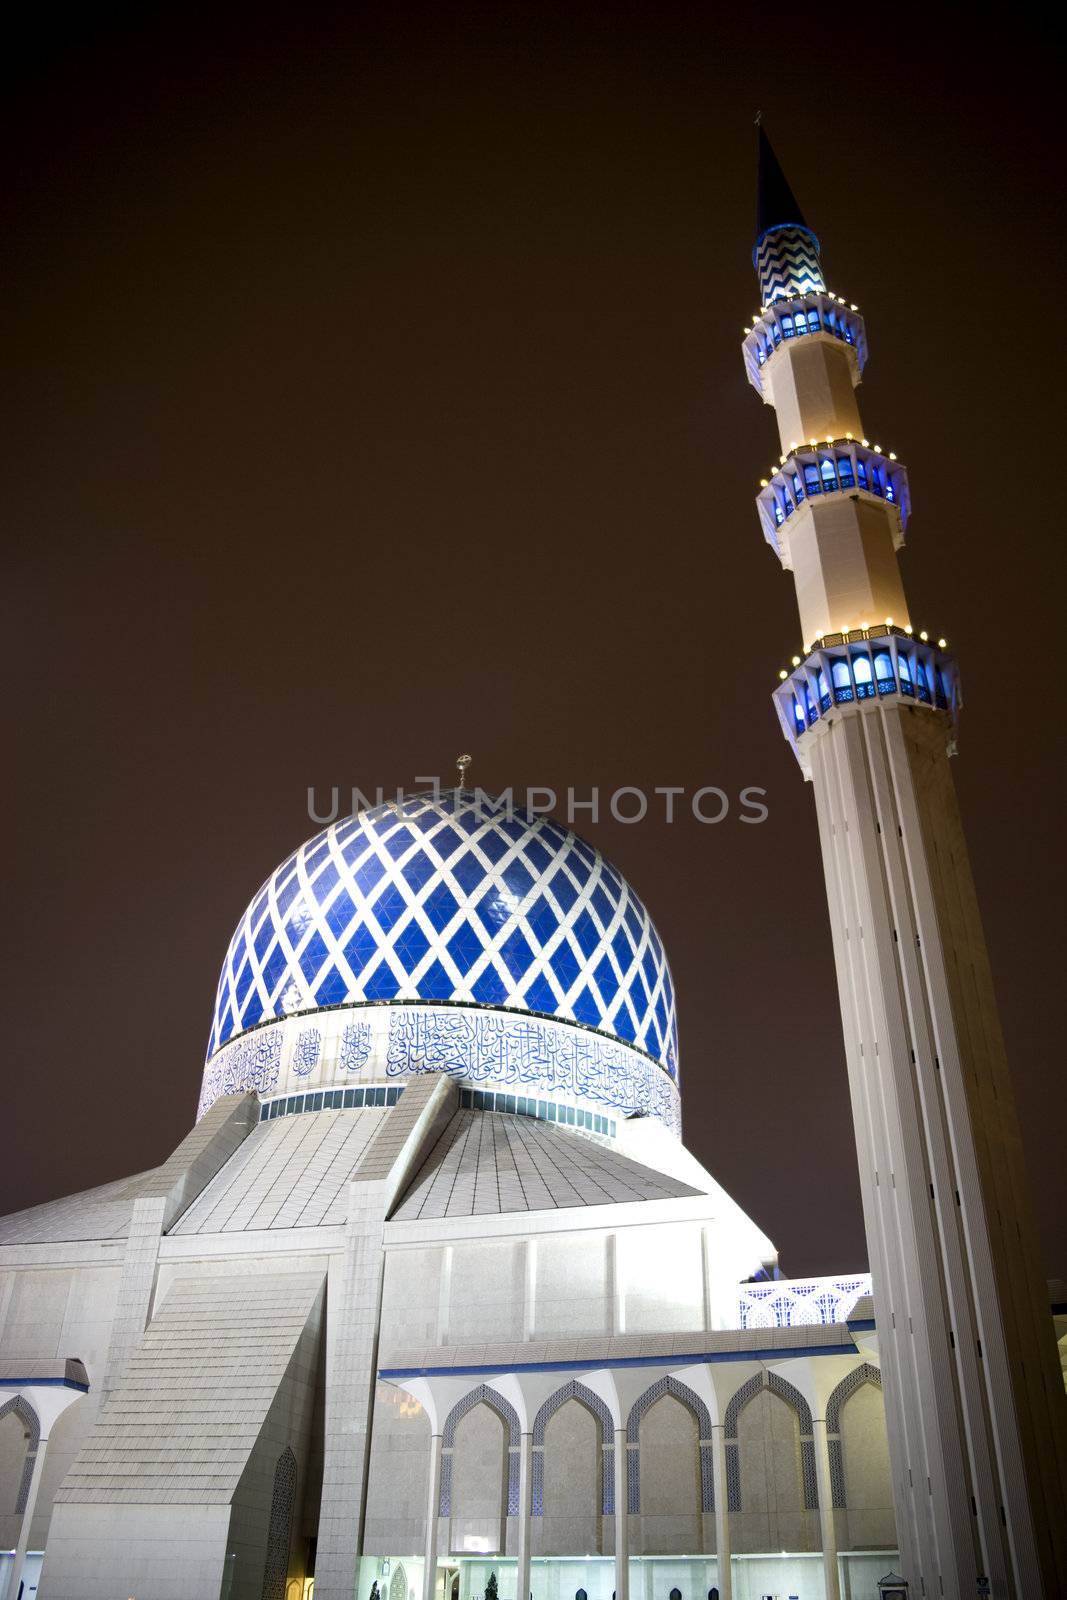 Night image of Sultan Salahuddin Abdul Aziz Shah Mosque or commonly known as the Blue Mosque, located at Shah Alam, Selangor, Malaysia. 